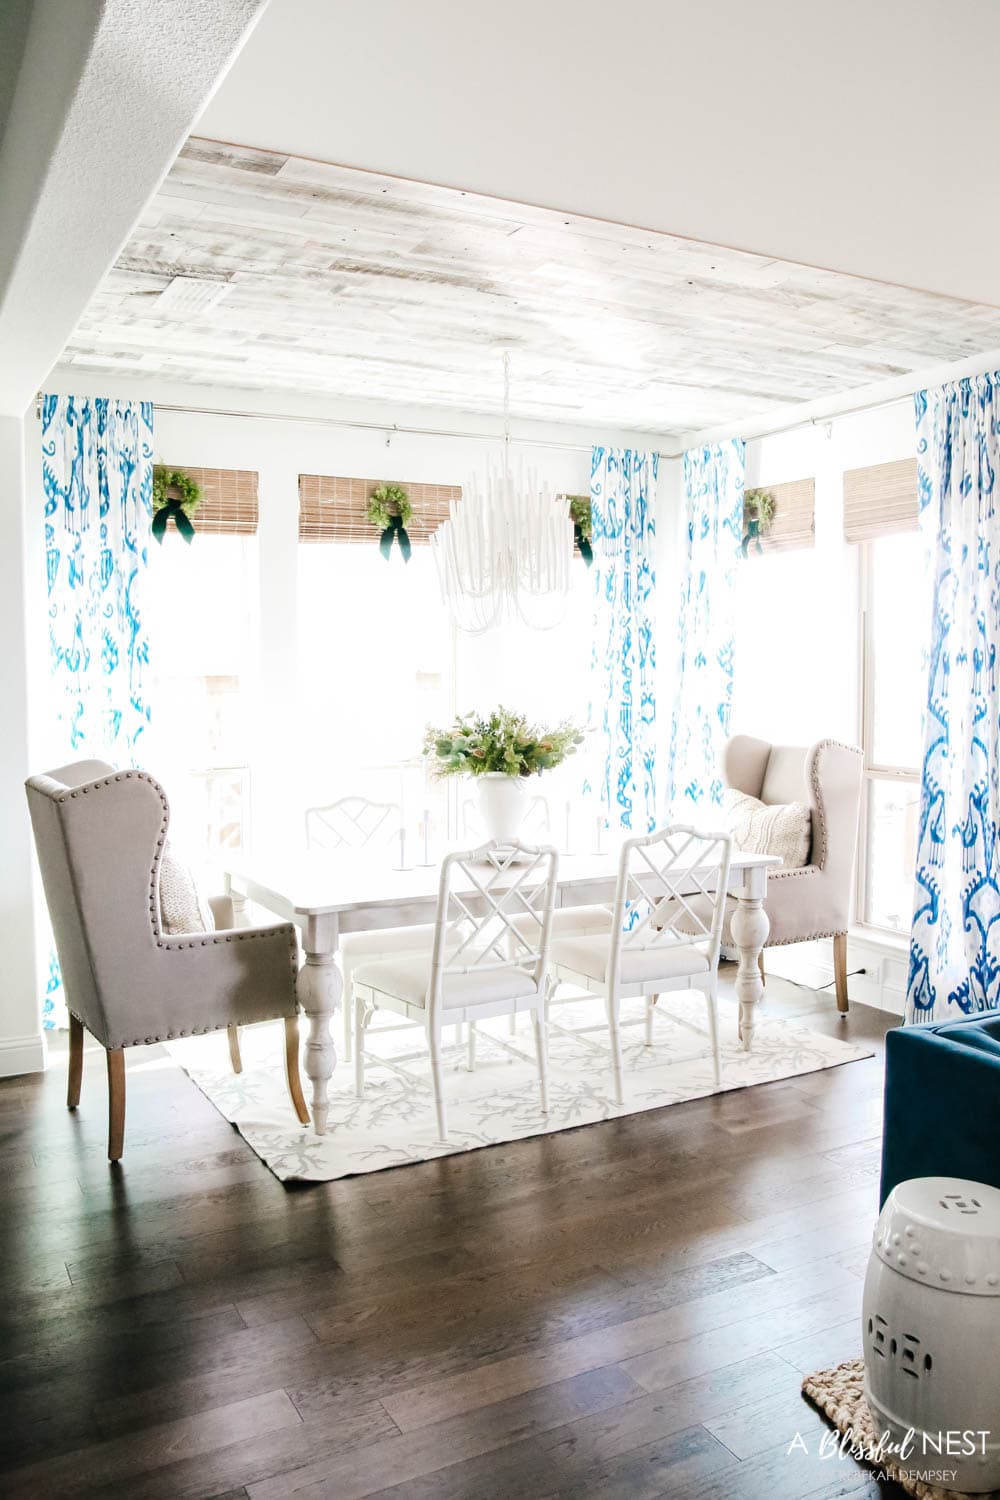 Dining room with white bamboo chairs and blue and white drapes. Simple white candles sticks next to a white vase with juniper floral picks.